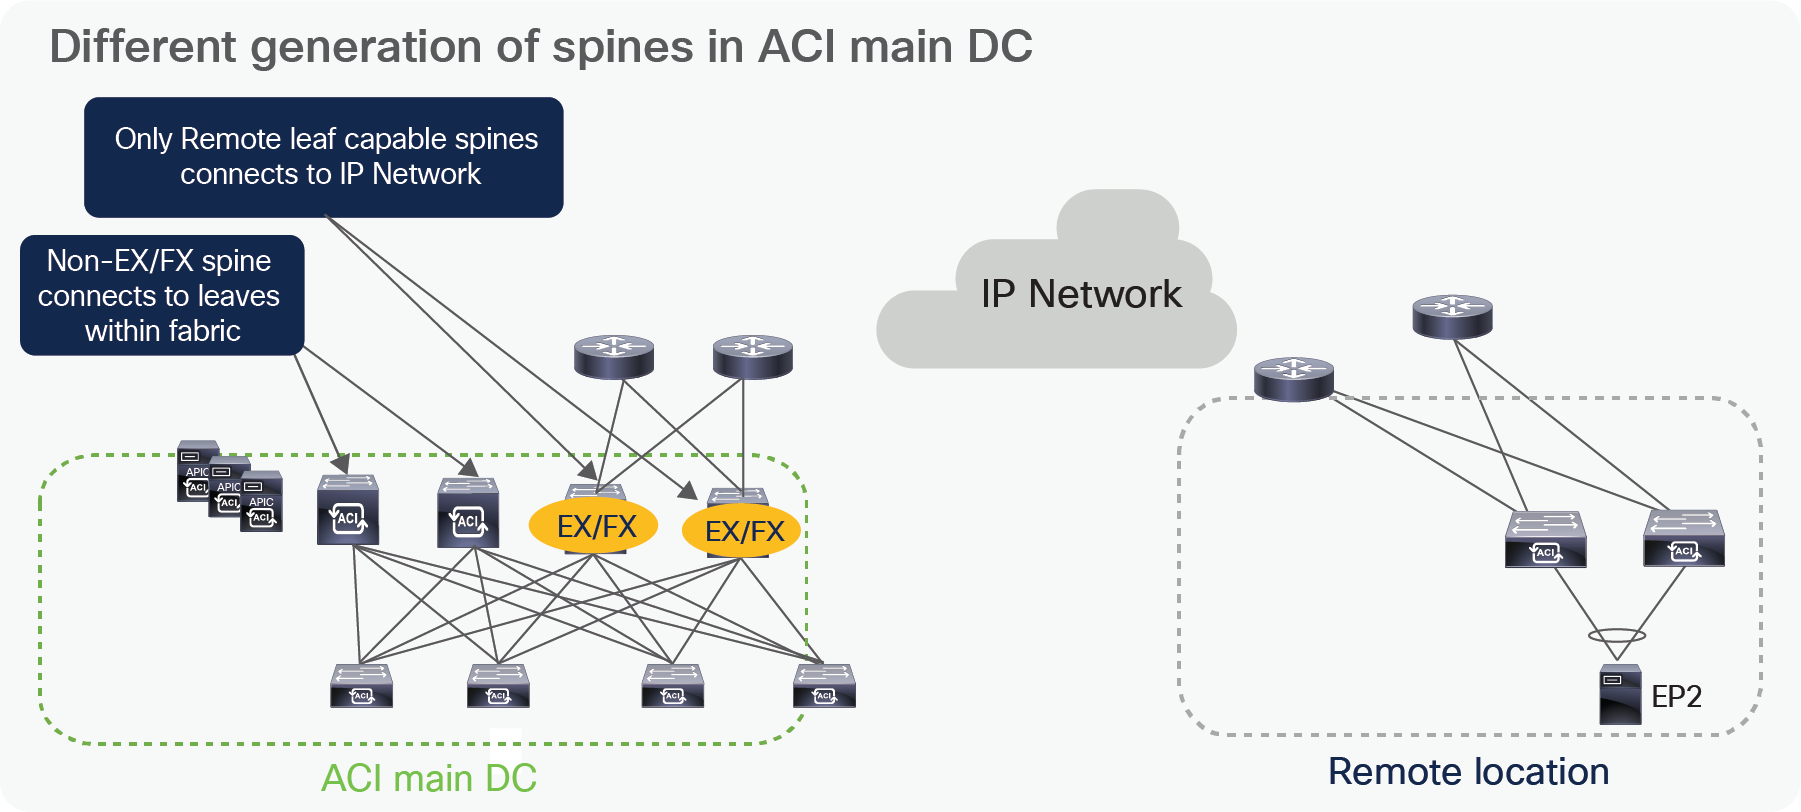 Different generation of spines in ACI main DC